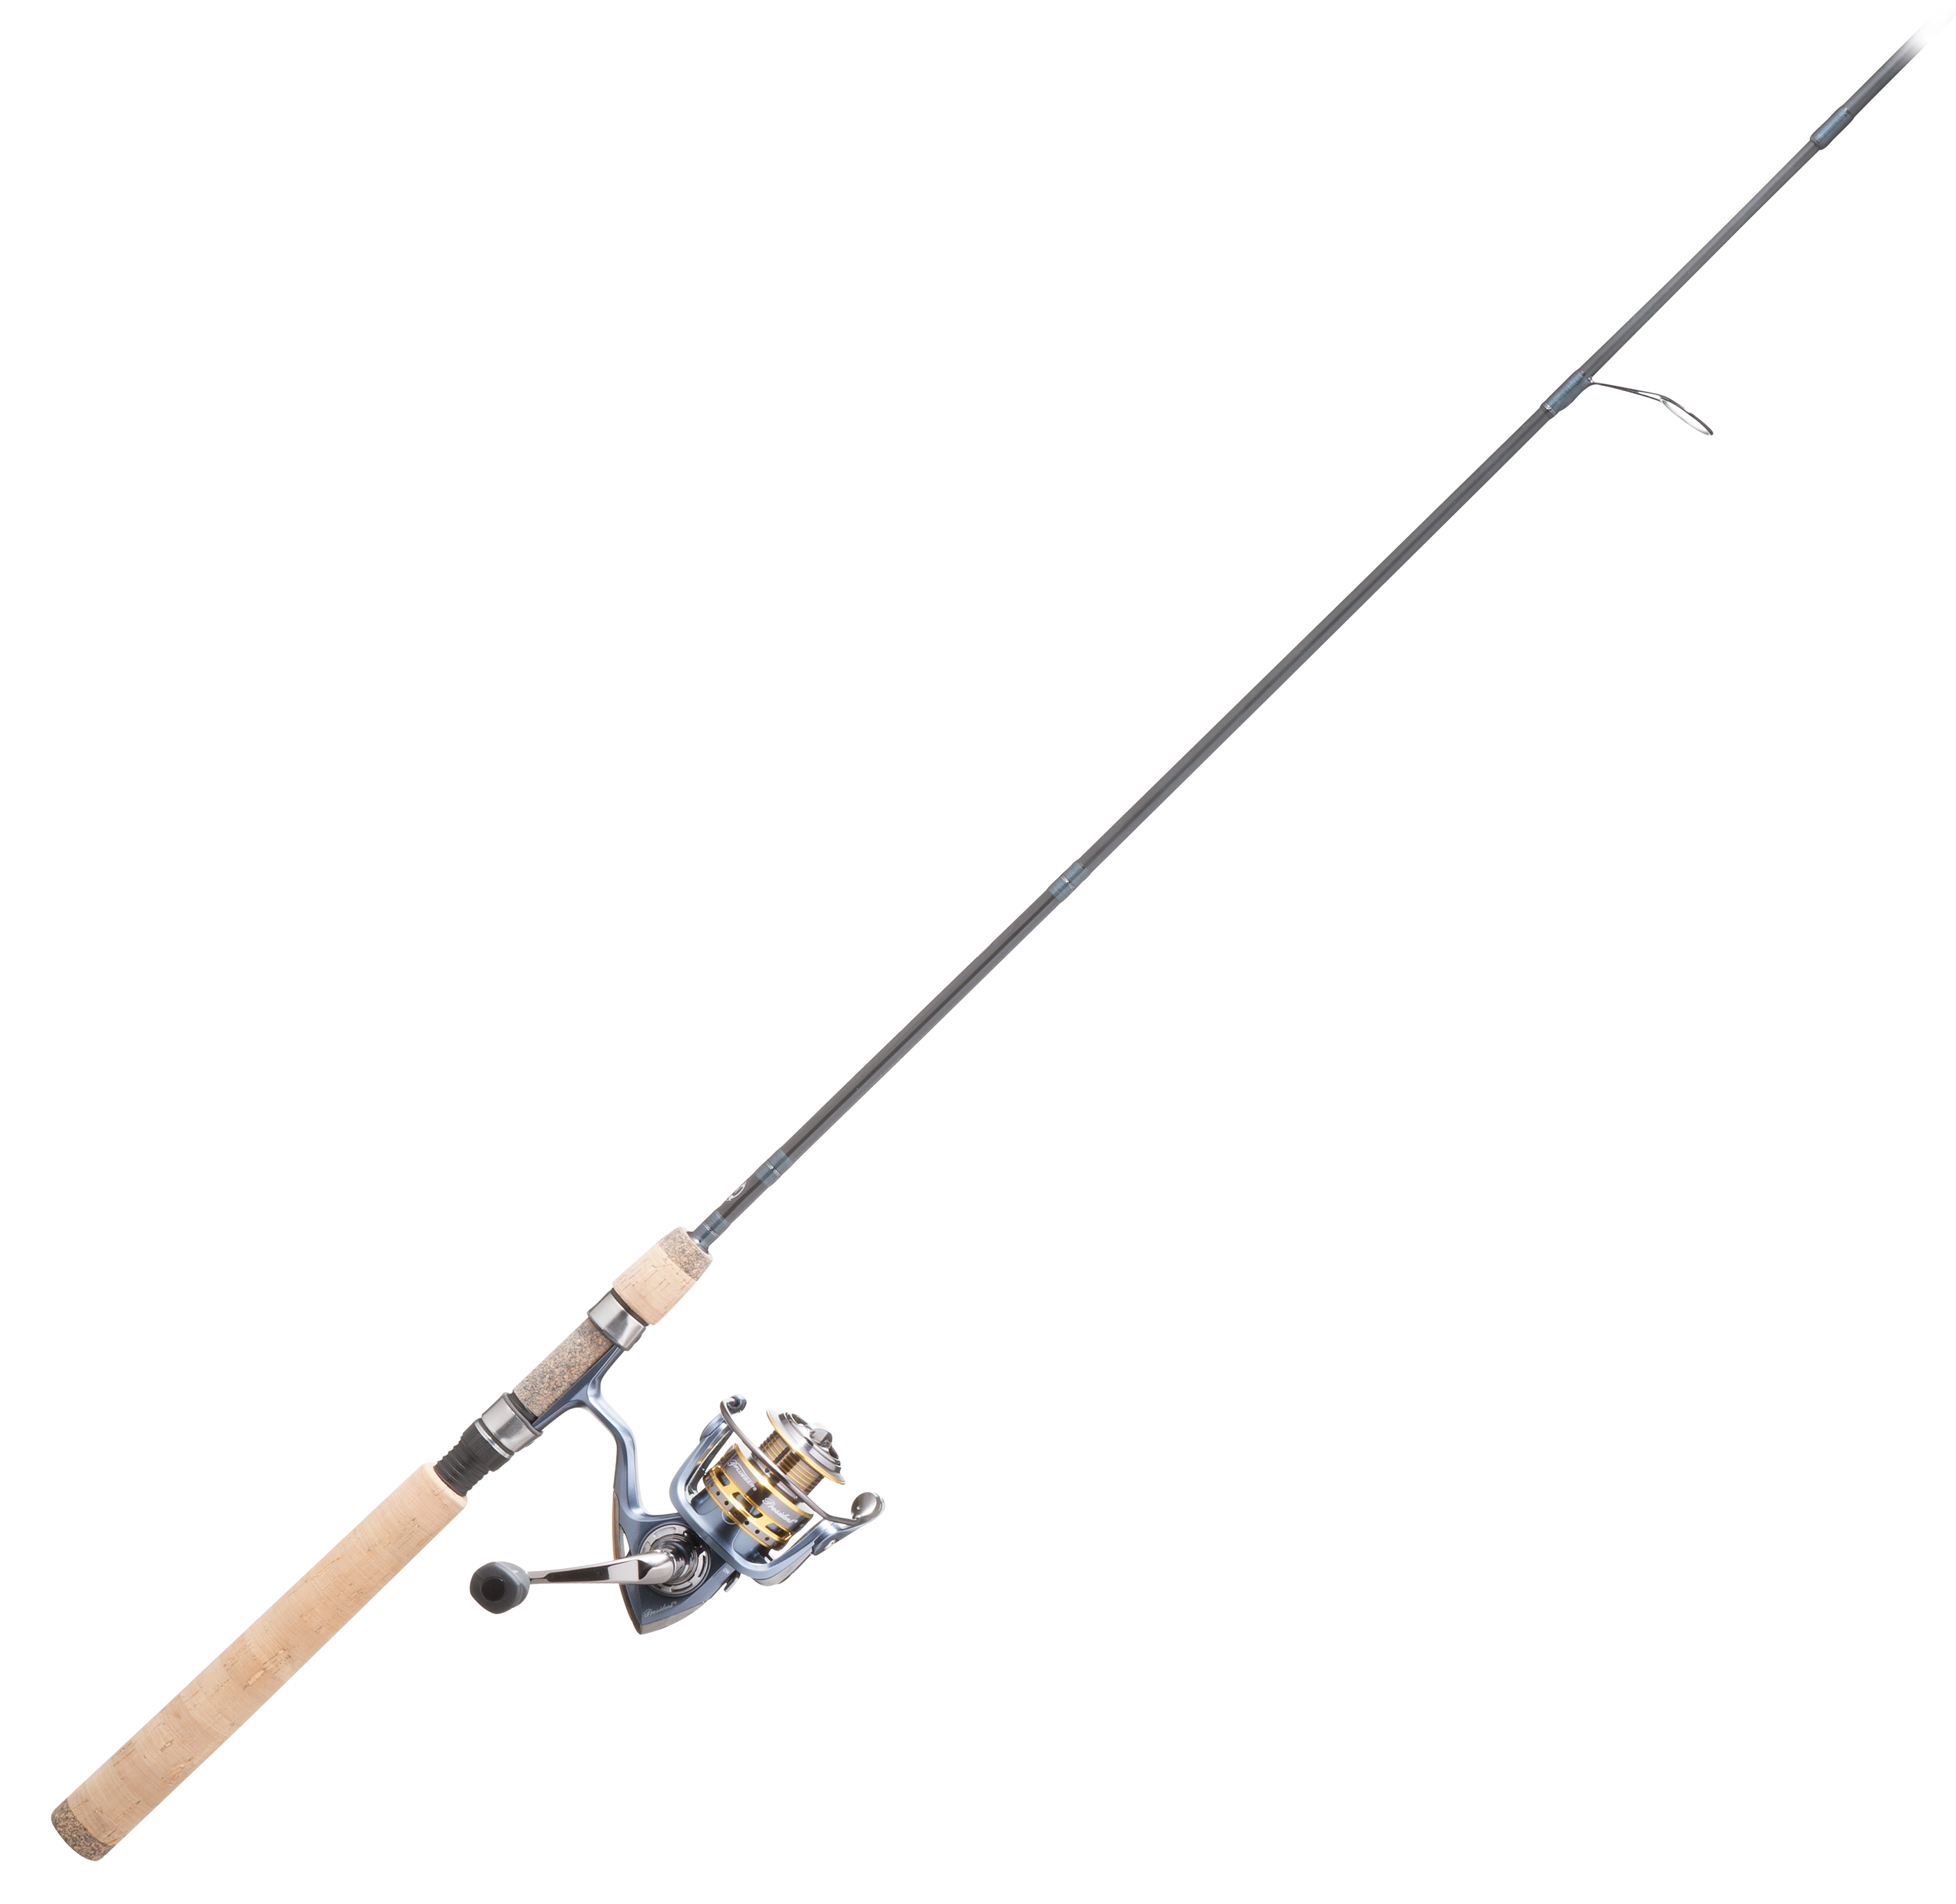 Pflueger President/Bass Pro Shops Micro Lite Spinning Rod and Reel Combo - Model PRESSP40X/MIL66MS-4